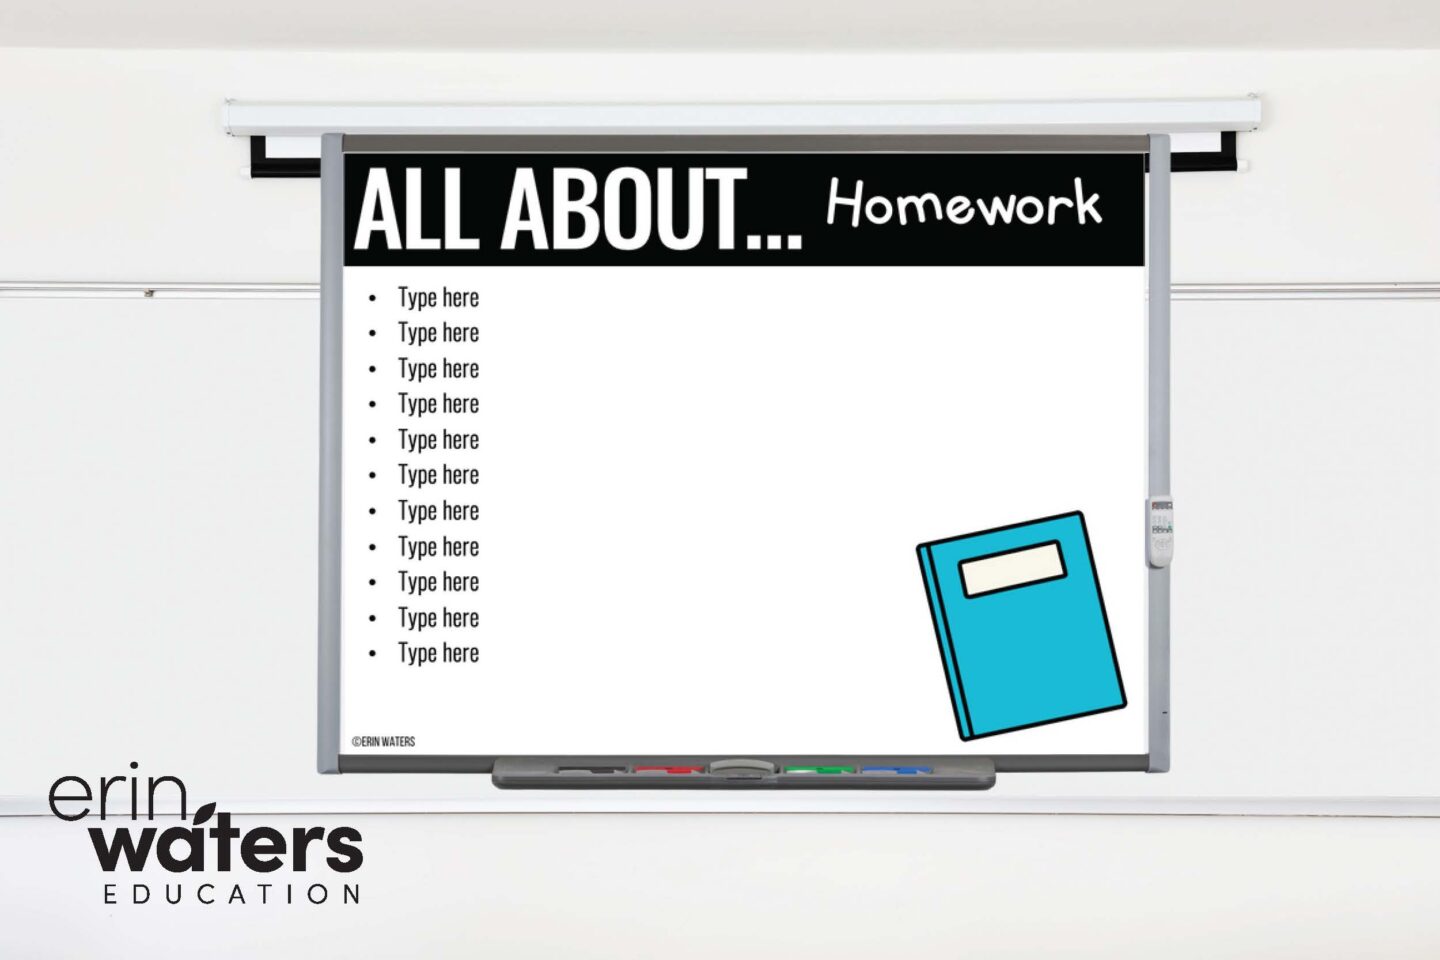 teacher toolkit slide example showing how to to do a classroom procedure (in this case, weekly homework)